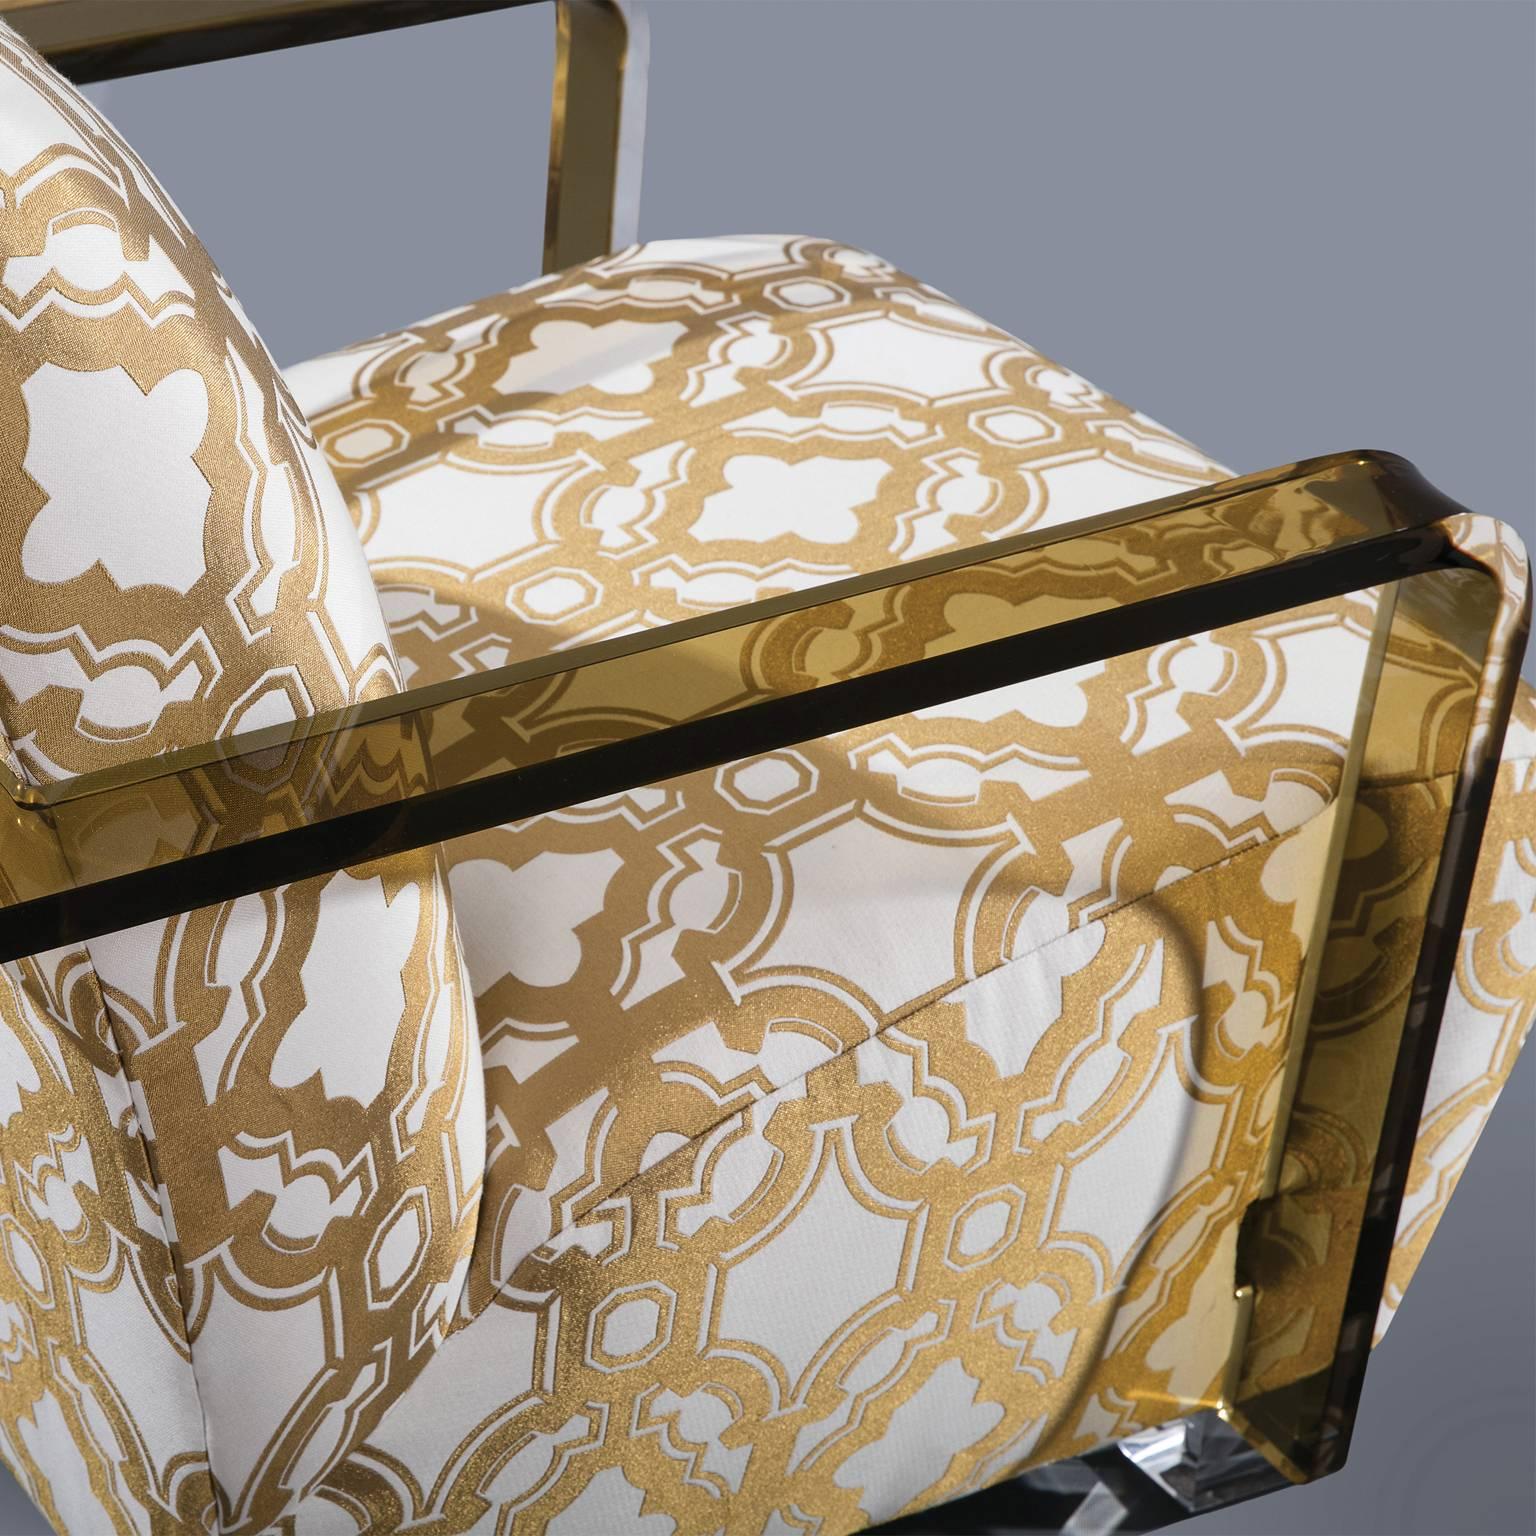 Limited Edition Gold and Ivory Marrakesh Gate Armchair In Excellent Condition For Sale In Miami, FL